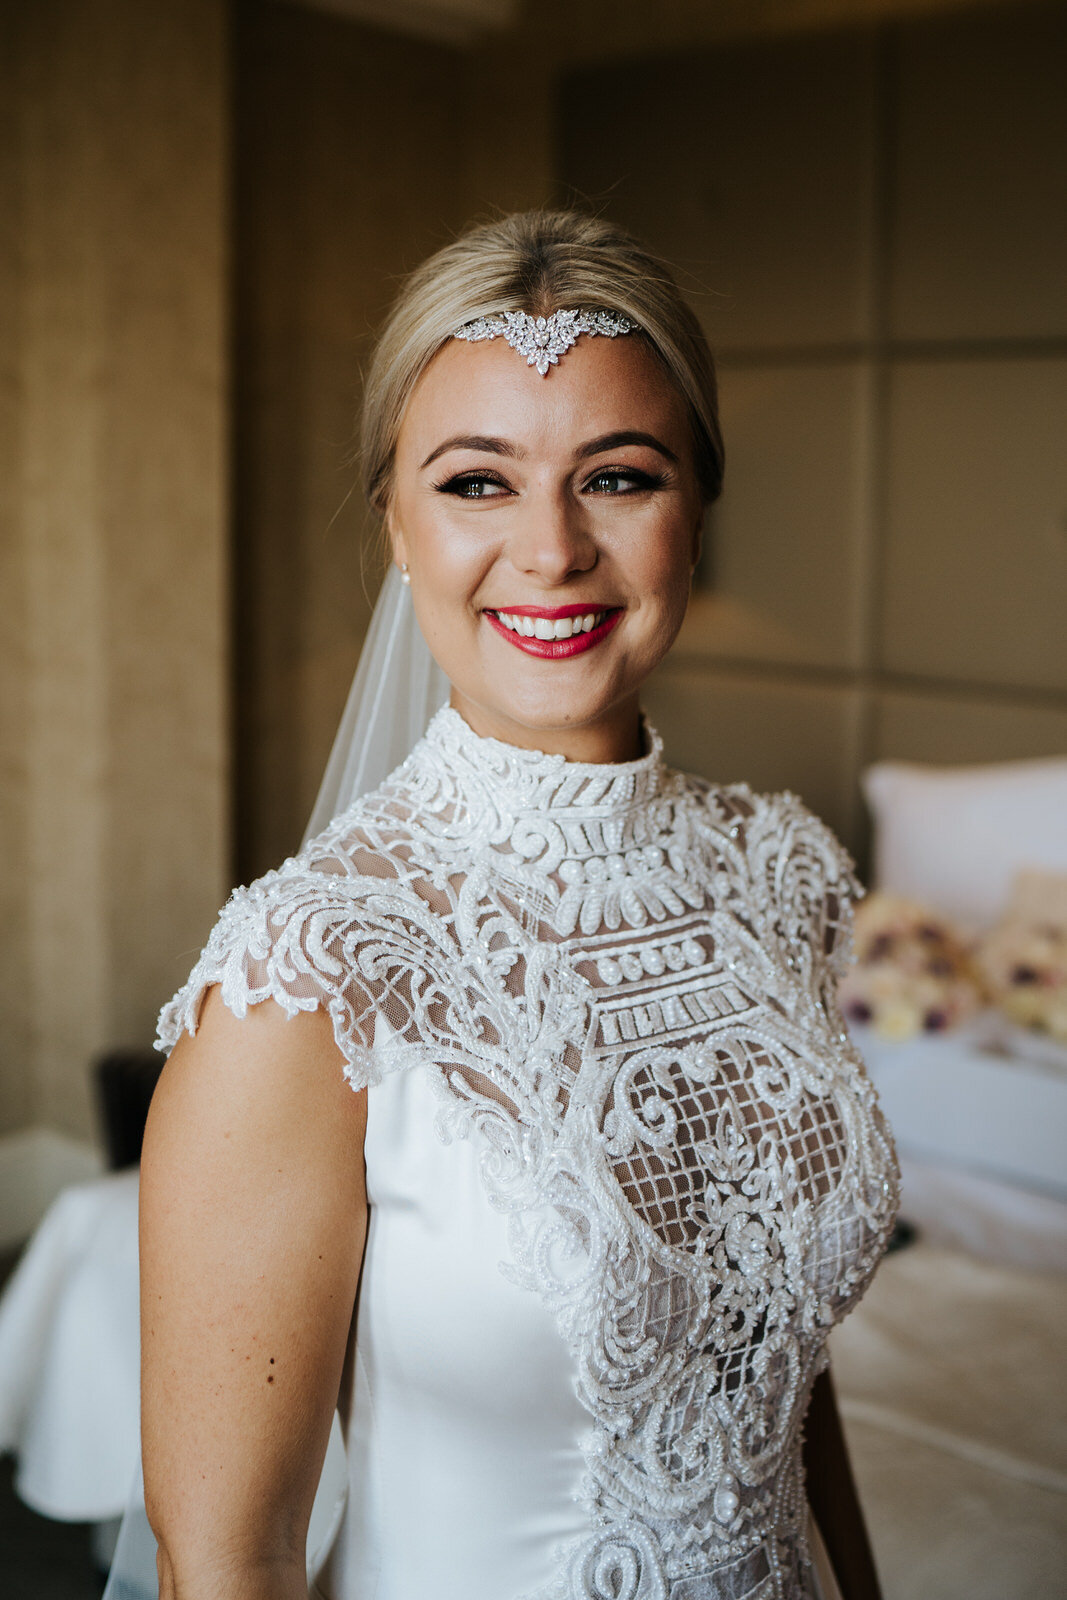 Bride smiles and has tears in her eyes as she stands and looks out the window in portrait during wedding prep at The Petersham